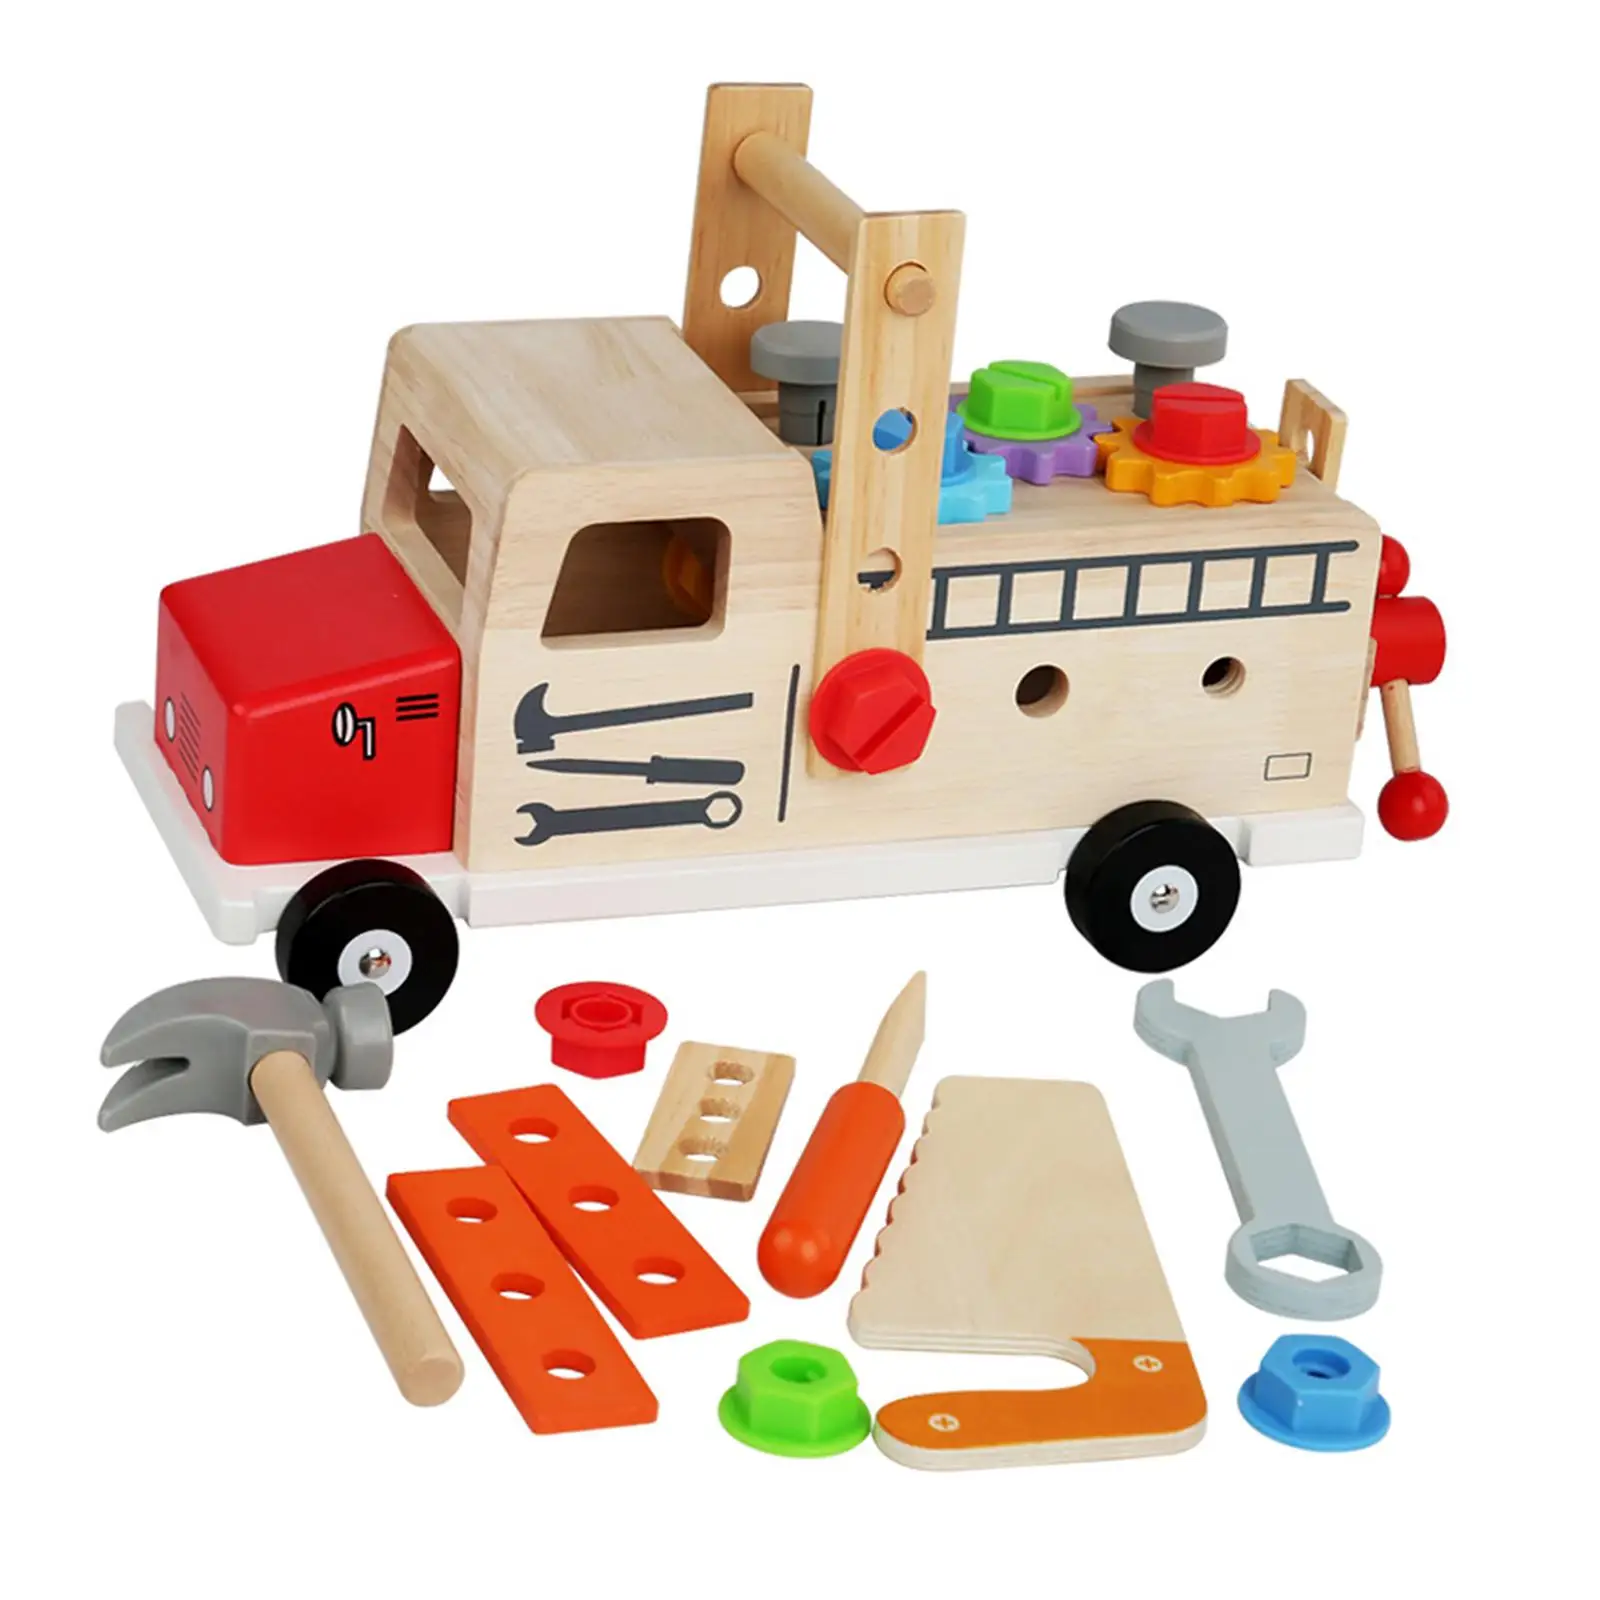 Wood Kids Tool Set Construction Toy Pretend Play Tool Kits Combination Disassembly and Assembly Nut Truck for Kids